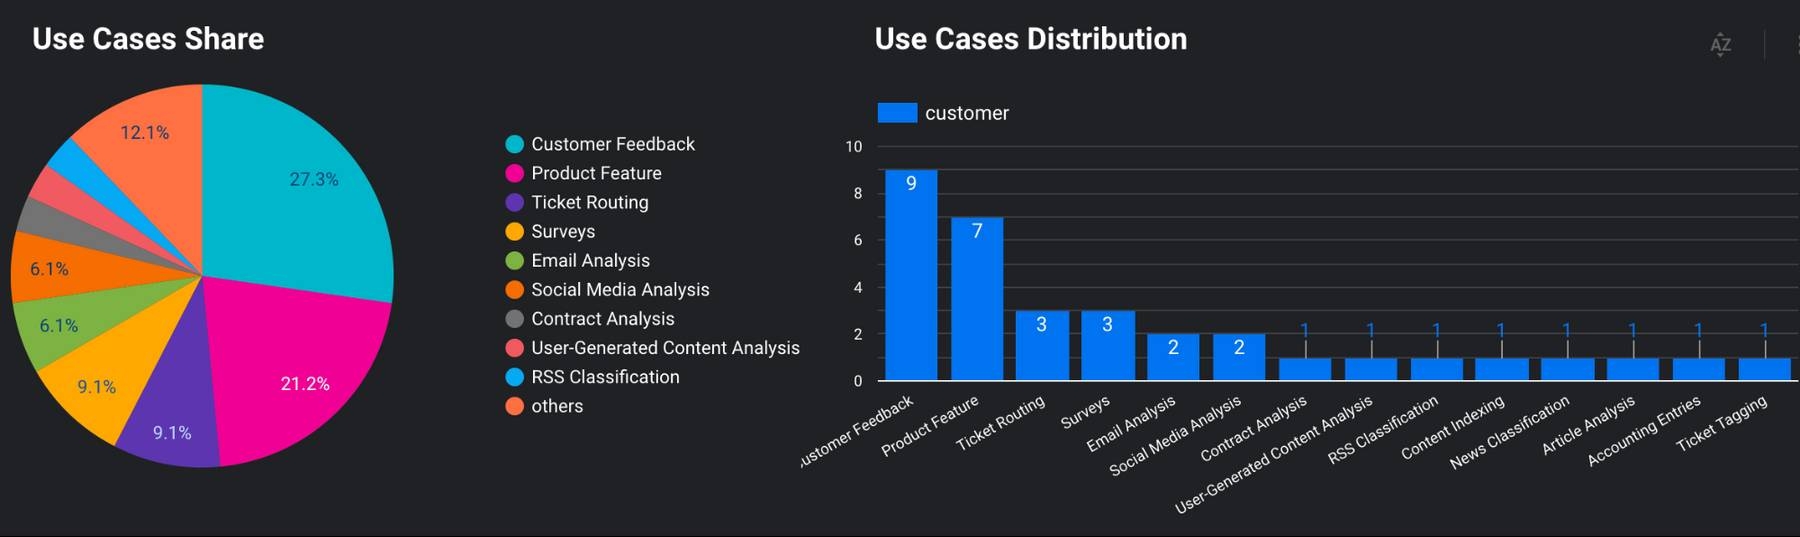 Customer churn analysis visualization showing 'use cases share' and 'use cases distribution.'